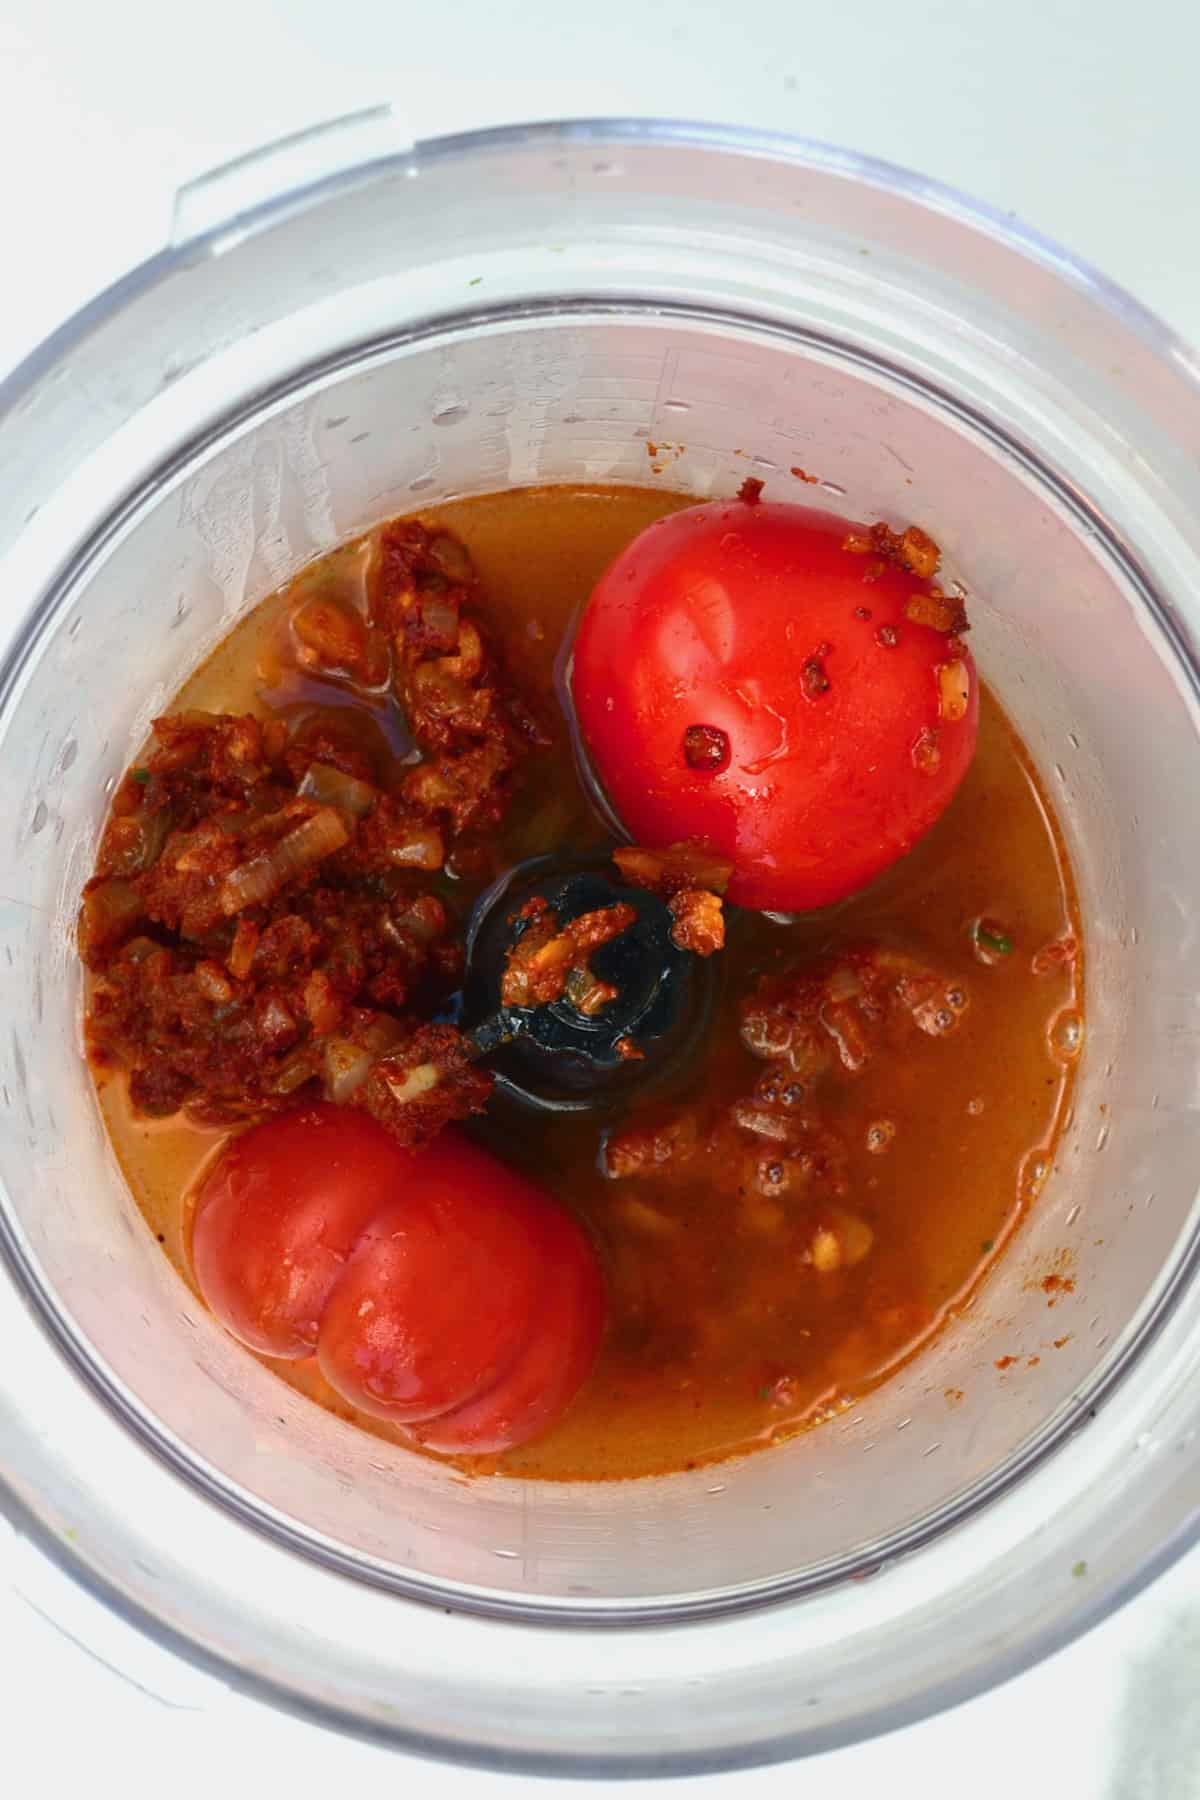 Tomatoes and sauce in a blender